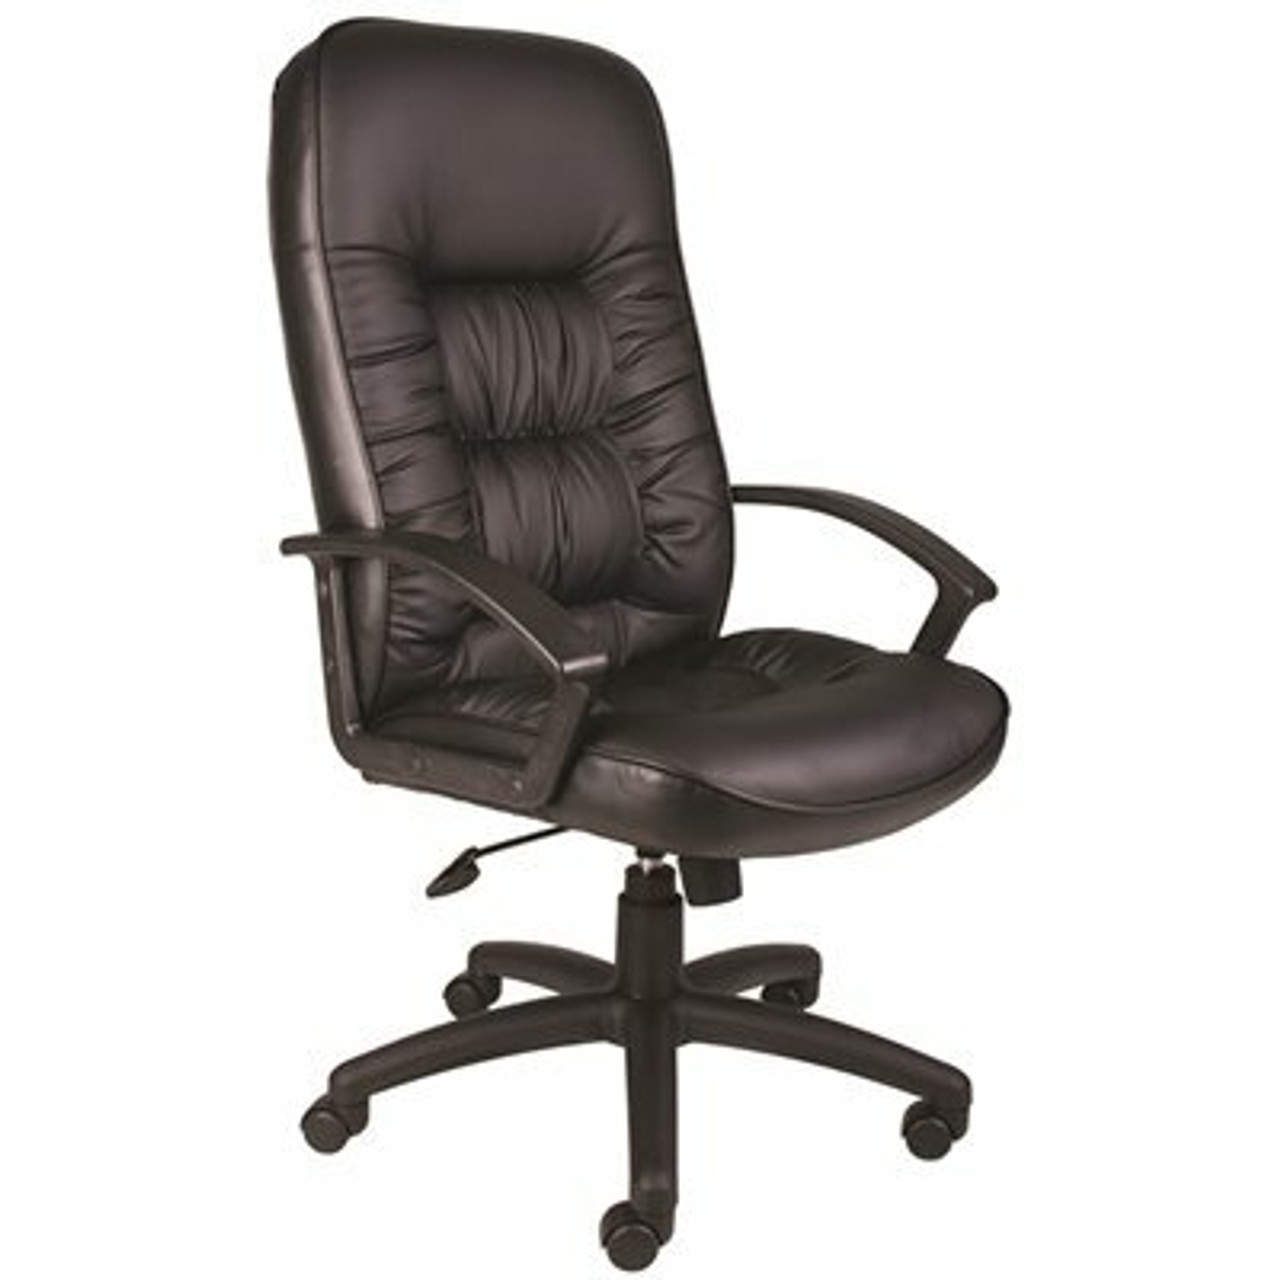 Boss Office Products 27 In. Width Big And Tall Black Vinyl Executive Chair With Swivel Seat - 3576743